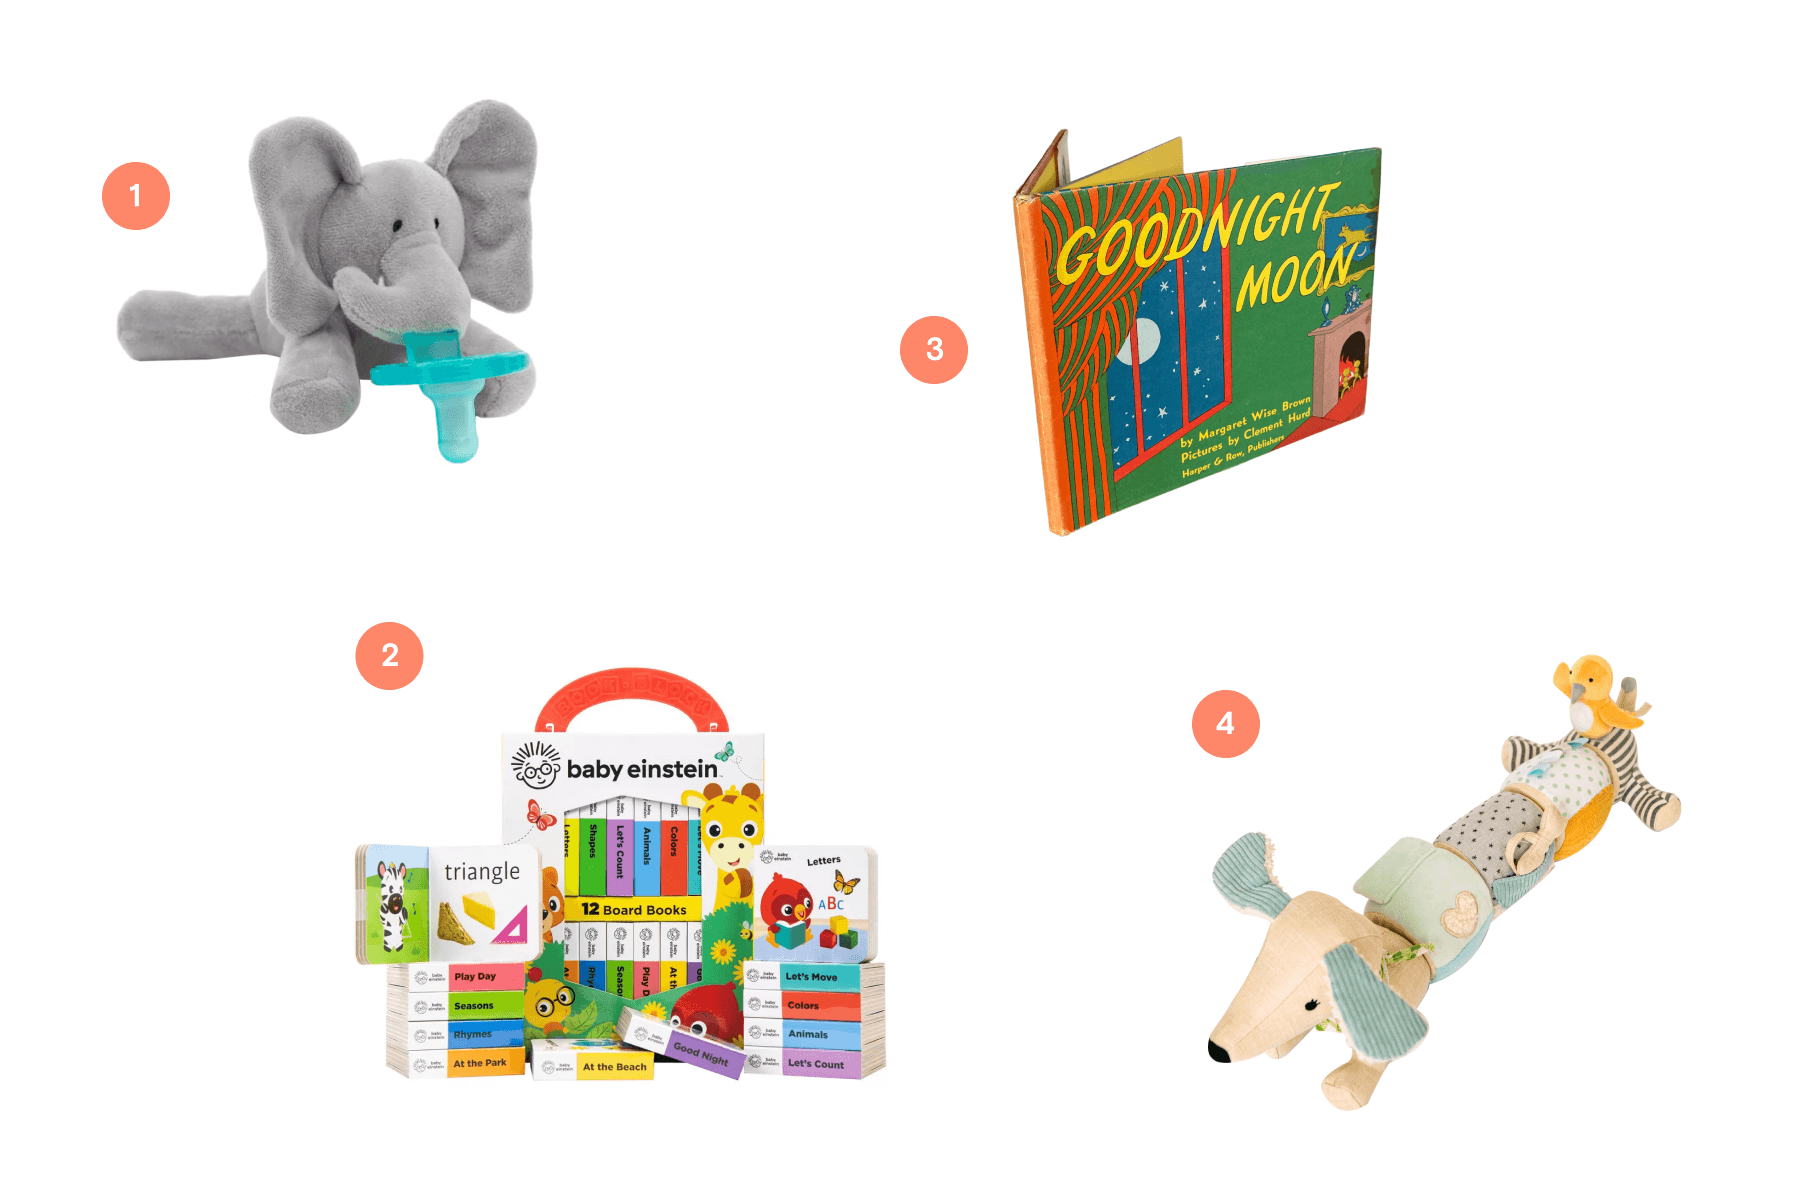 Four numbered baby items: An elephant pacifier toy, Baby Einstein books, a Goodnight Moon book, and a colorful dachshund toy.